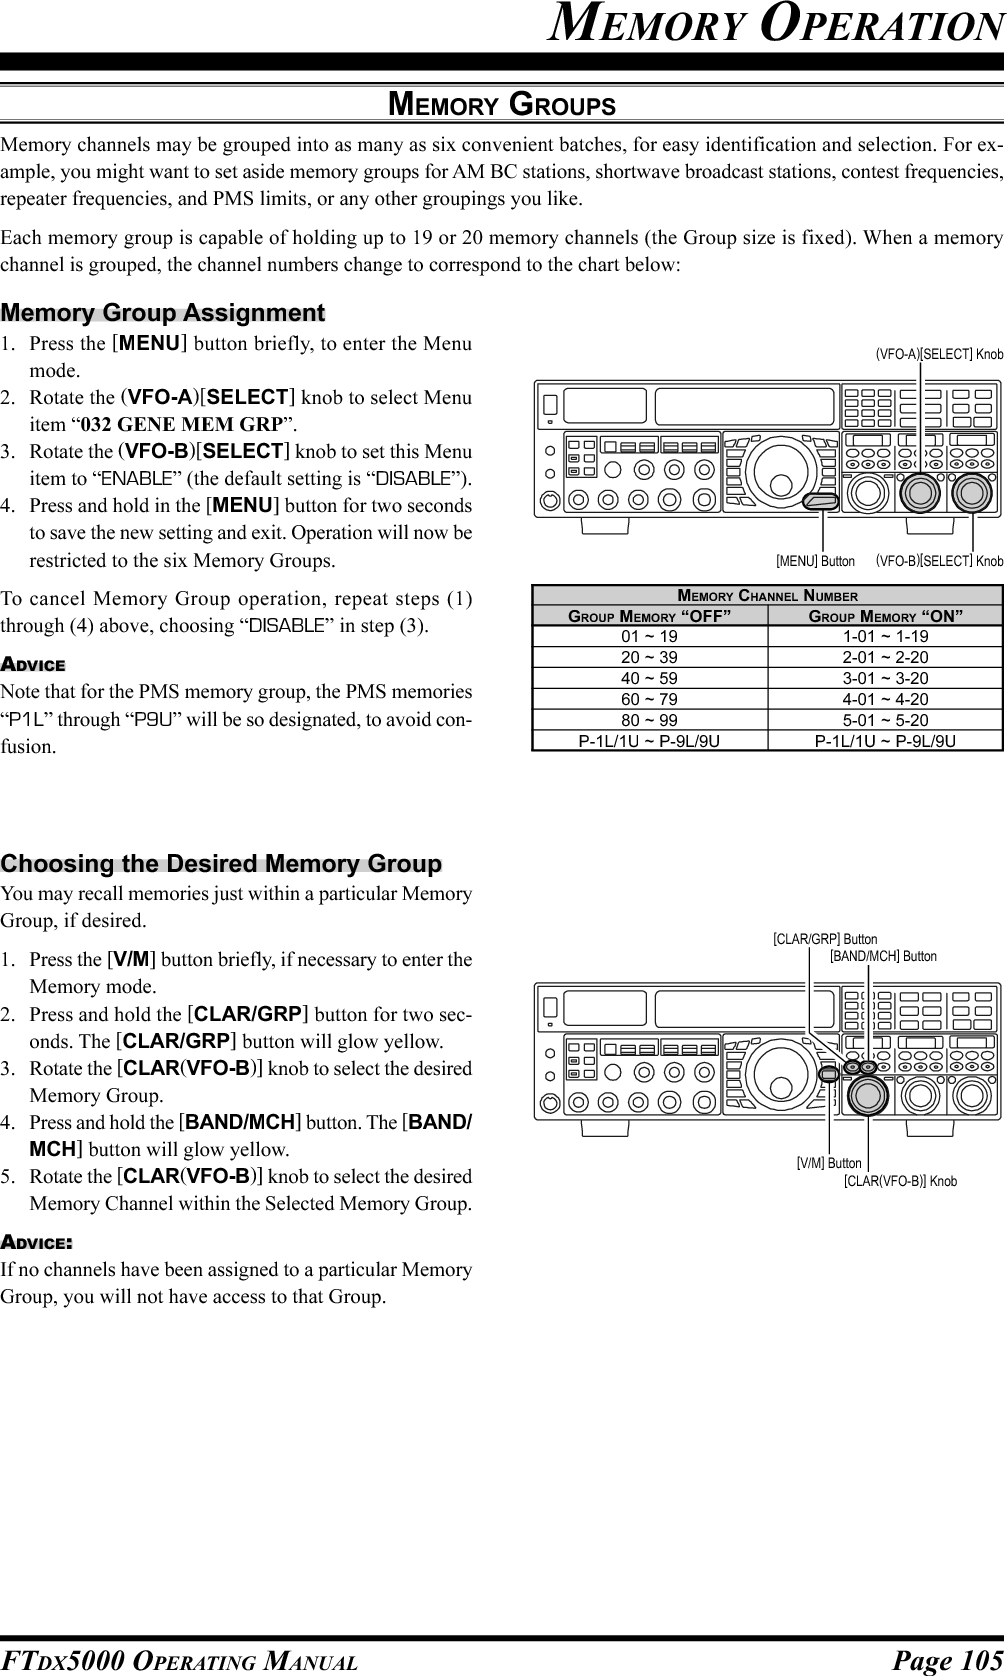 Page 105FTDX5000 OPERATING MANUALMEMORY GROUPSMemory channels may be grouped into as many as six convenient batches, for easy identification and selection. For ex-ample, you might want to set aside memory groups for AM BC stations, shortwave broadcast stations, contest frequencies,repeater frequencies, and PMS limits, or any other groupings you like.Each memory group is capable of holding up to 19 or 20 memory channels (the Group size is fixed). When a memorychannel is grouped, the channel numbers change to correspond to the chart below:Memory Group Assignment1. Press the [MENU] button briefly, to enter the Menumode.2. Rotate the (VFO-A)[SELECT] knob to select Menuitem “032 GENE MEM GRP”.3. Rotate the (VFO-B)[SELECT] knob to set this Menuitem to “ENABLE” (the default setting is “DISABLE”).4. Press and hold in the [MENU] button for two secondsto save the new setting and exit. Operation will now berestricted to the six Memory Groups.To cancel Memory Group operation, repeat steps (1)through (4) above, choosing “DISABLE” in step (3).ADVICENote that for the PMS memory group, the PMS memories“P1L” through “P9U” will be so designated, to avoid con-fusion.Choosing the Desired Memory GroupYou may recall memories just within a particular MemoryGroup, if desired.1. Press the [V/M] button briefly, if necessary to enter theMemory mode.2. Press and hold the [CLAR/GRP] button for two sec-onds. The [CLAR/GRP] button will glow yellow.3. Rotate the [CLAR(VFO-B)] knob to select the desiredMemory Group.4. Press and hold the [BAND/MCH] button. The [BAND/MCH] button will glow yellow.5. Rotate the [CLAR(VFO-B)] knob to select the desiredMemory Channel within the Selected Memory Group.ADVICE:If no channels have been assigned to a particular MemoryGroup, you will not have access to that Group.MEMORY OPERATION(VFO-B)[SELECT] Knob[MENU] Button(VFO-A)[SELECT] KnobGROUP MEMORY “OFF”01 ~ 1920 ~ 3940 ~ 5960 ~ 7980 ~ 99P-1L/1U ~ P-9L/9UMEMORY CHANNEL NUMBERGROUP MEMORY “ON”1-01 ~ 1-192-01 ~ 2-203-01 ~ 3-204-01 ~ 4-205-01 ~ 5-20P-1L/1U ~ P-9L/9U[CLAR(VFO-B)] Knob[V/M] Button[BAND/MCH] Button[CLAR/GRP] Button